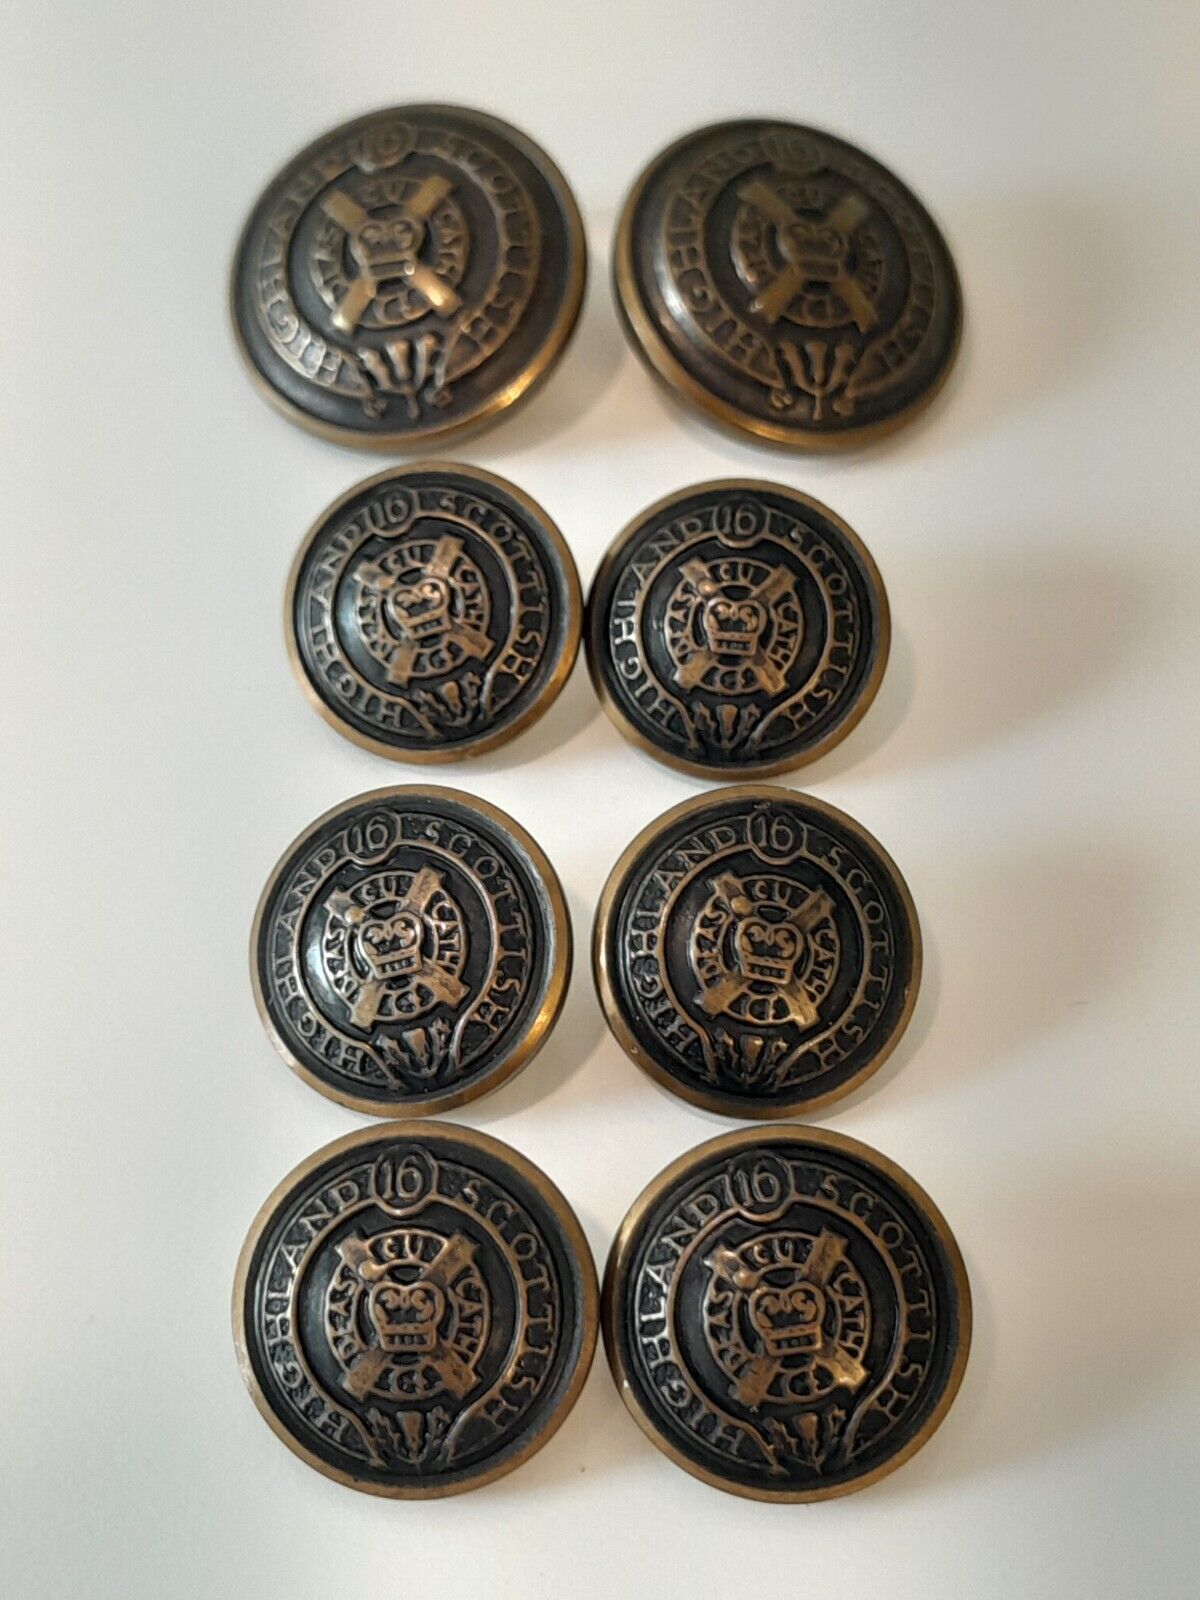 Scottish Highland Military Buttons Lot Of 8  16th Infantry Brass 2 Sizes